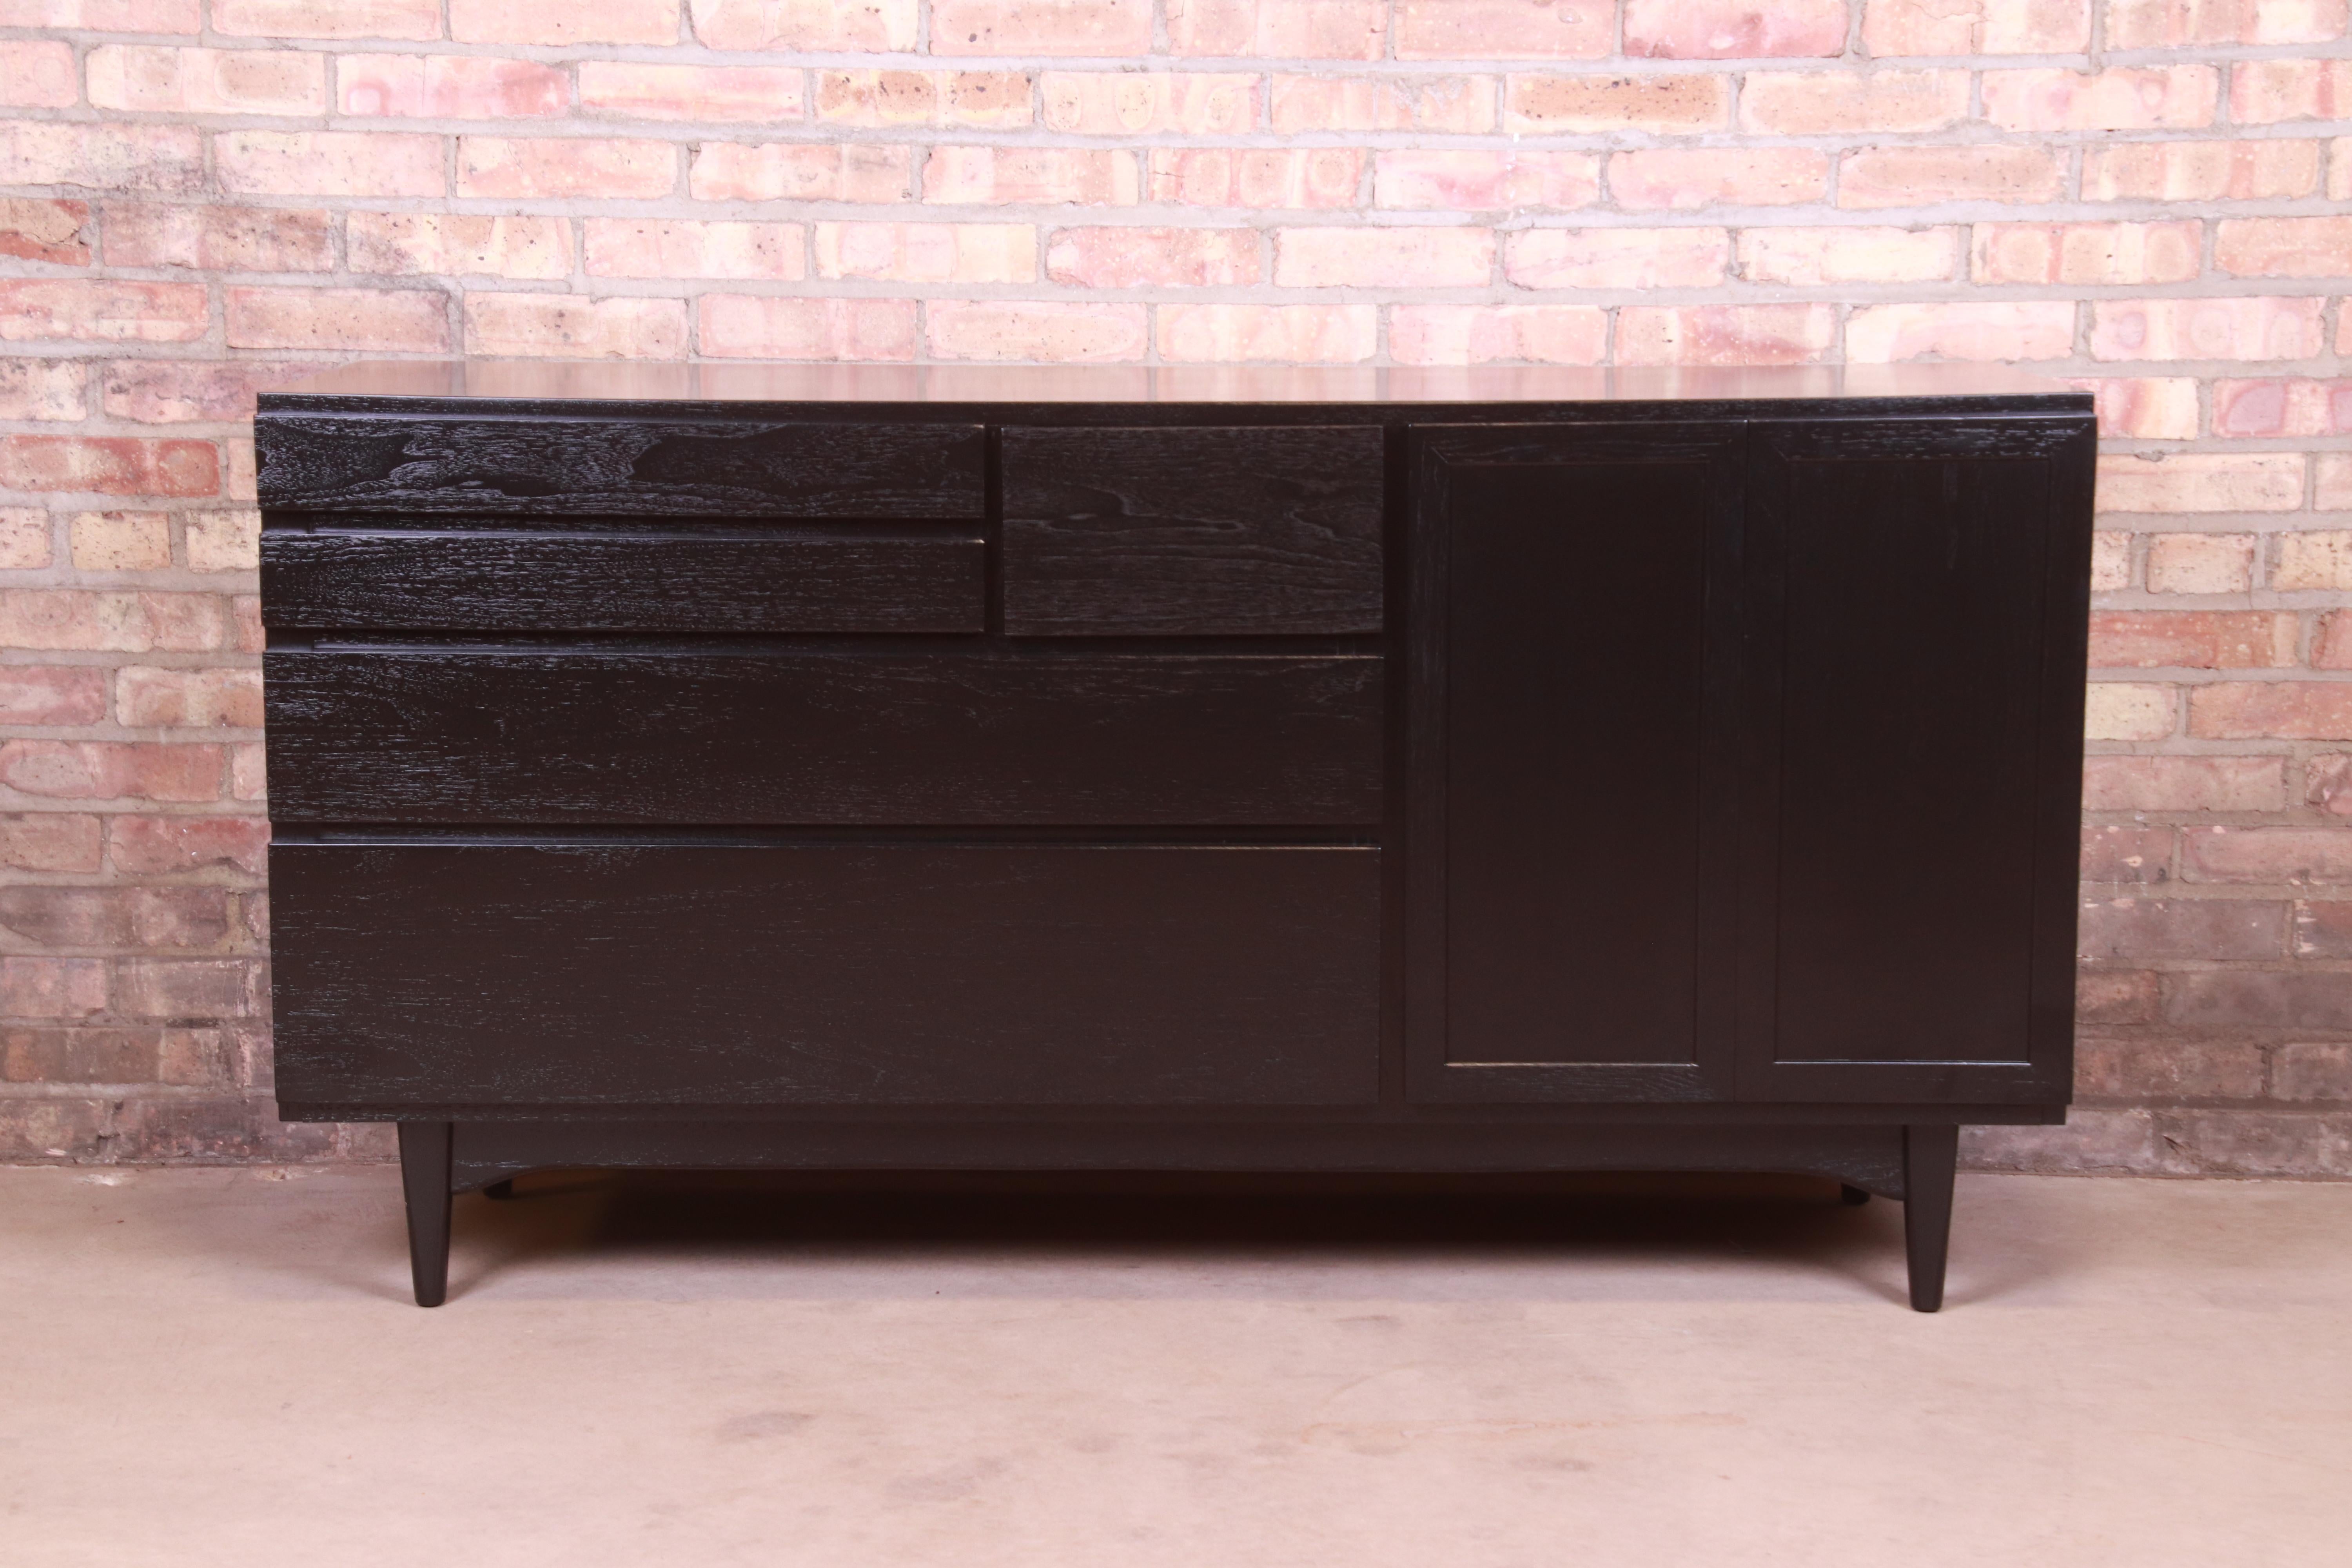 A gorgeous Mid-Century Modern dresser, credenza, or sideboard server

In the manner of Gio Ponti

By John Stuart

USA, 1950s

Black lacquered walnut, with brass hinges.

Measures: 57.63